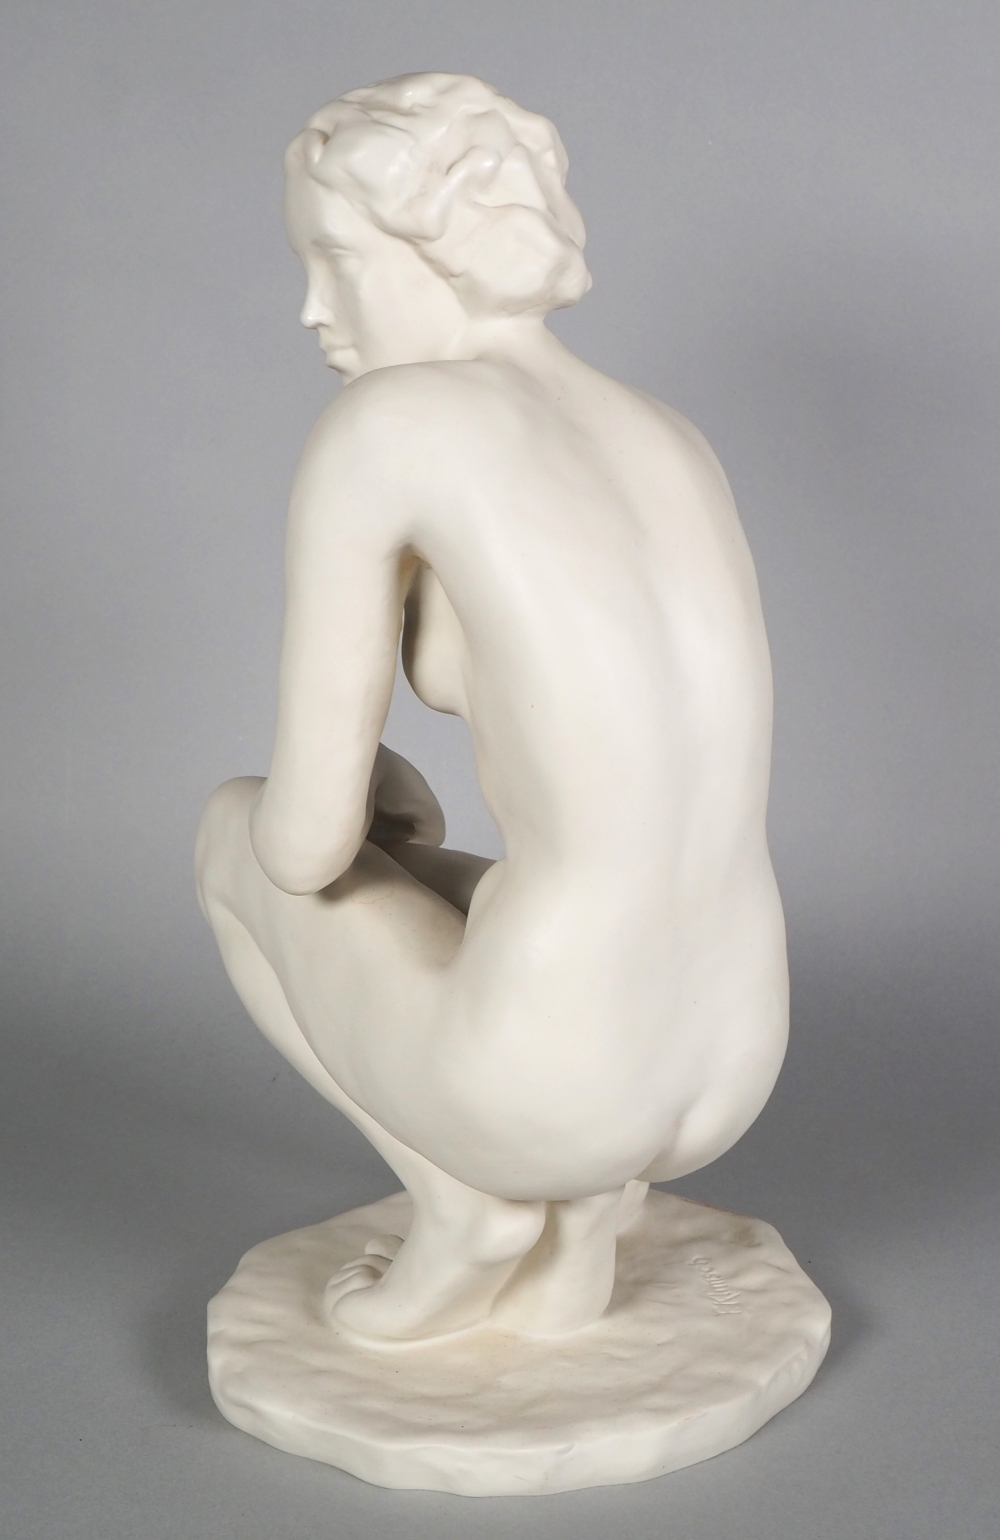 Rosenthal, porcelain figurine "The Squatting Woman", around 1938 - Image 3 of 4